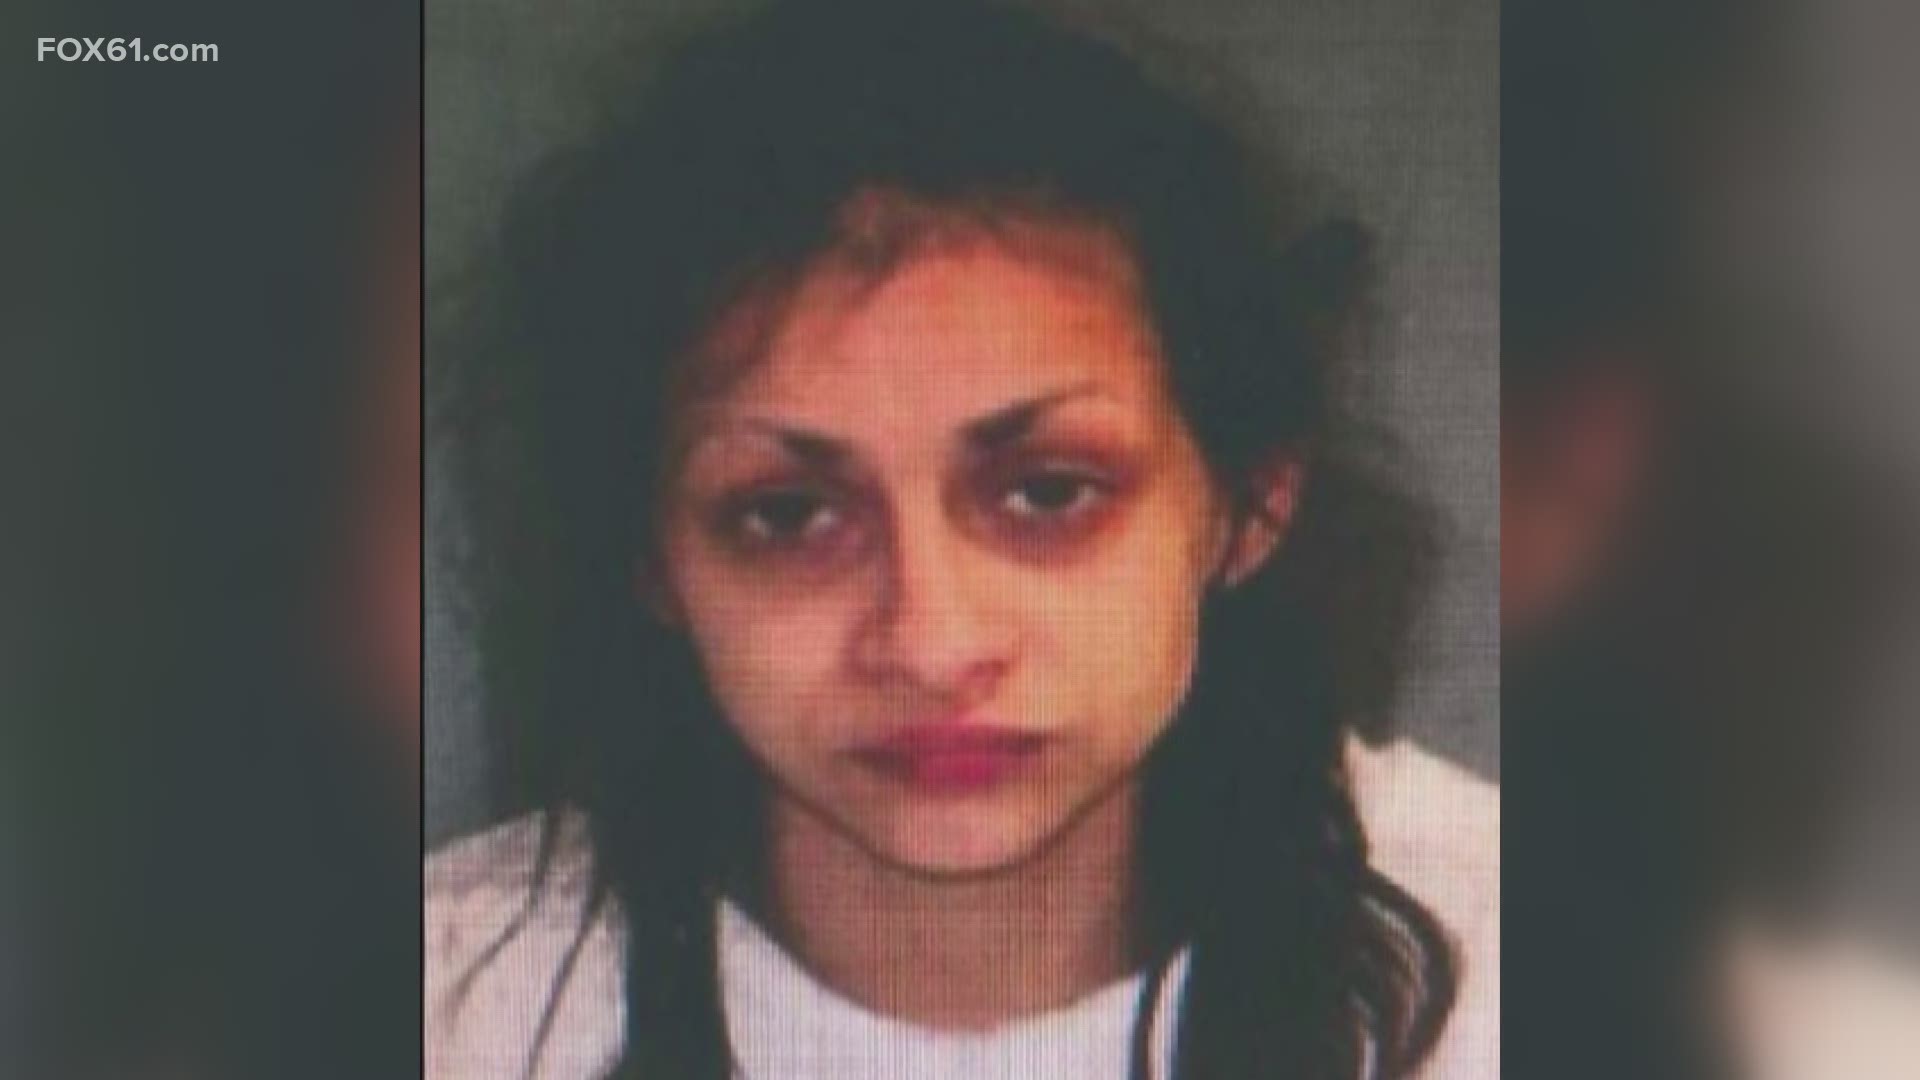 Police were searching for Melissa Feliciano, 31, in the death of Robert Iacobucci.